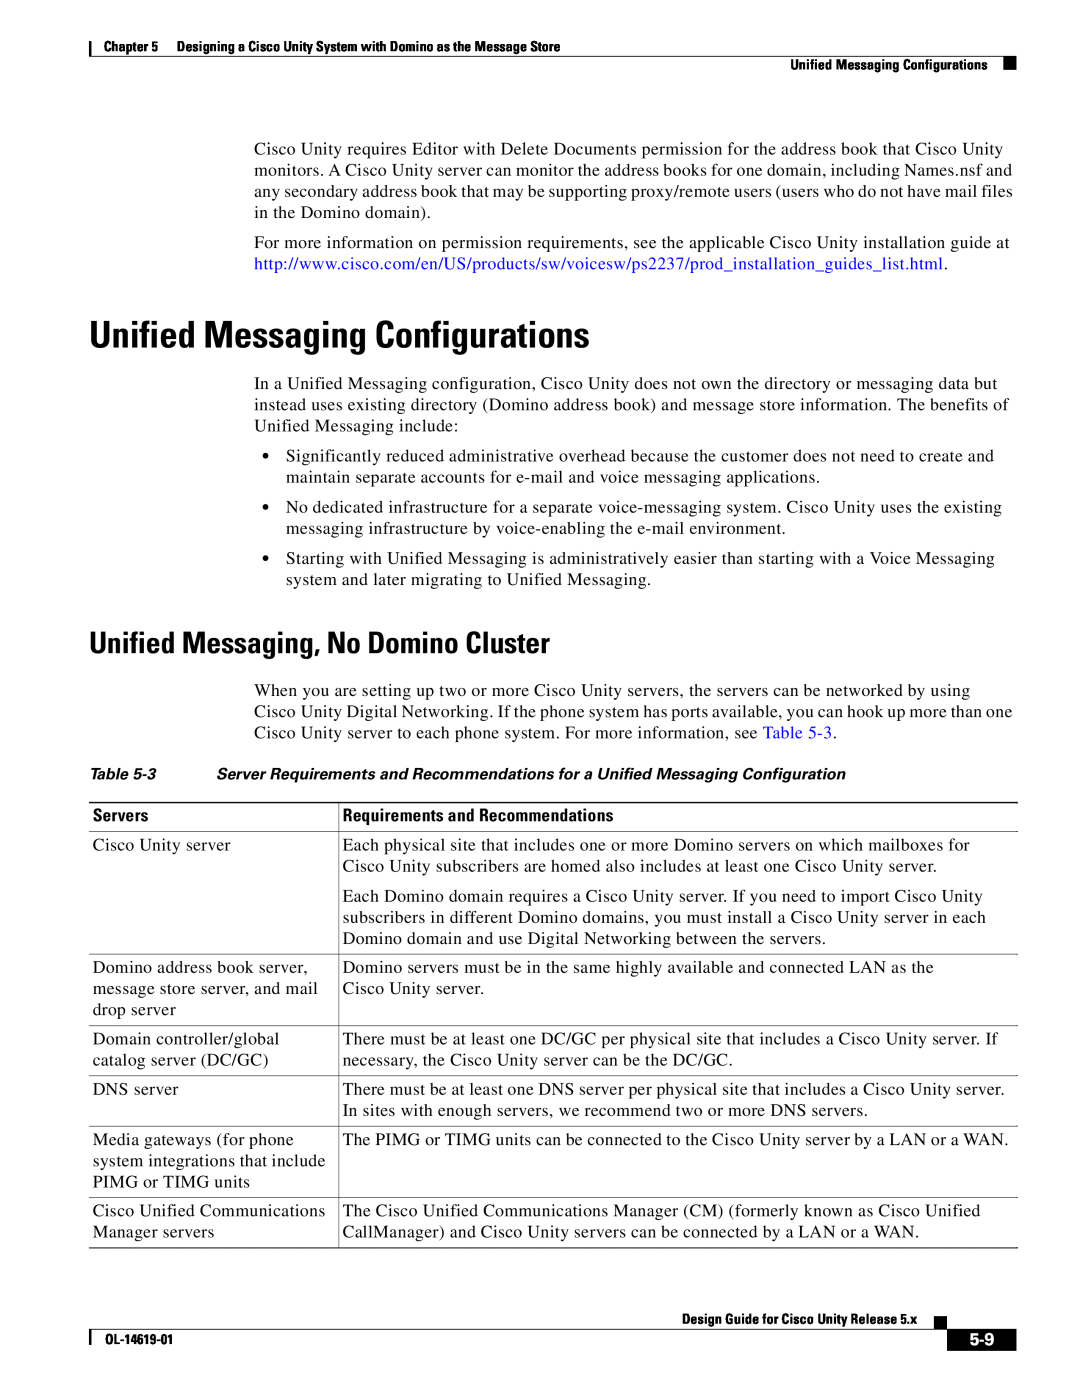 Cisco Systems OL-14619-01 manual Unified Messaging Configurations, Unified Messaging, No Domino Cluster, Servers 